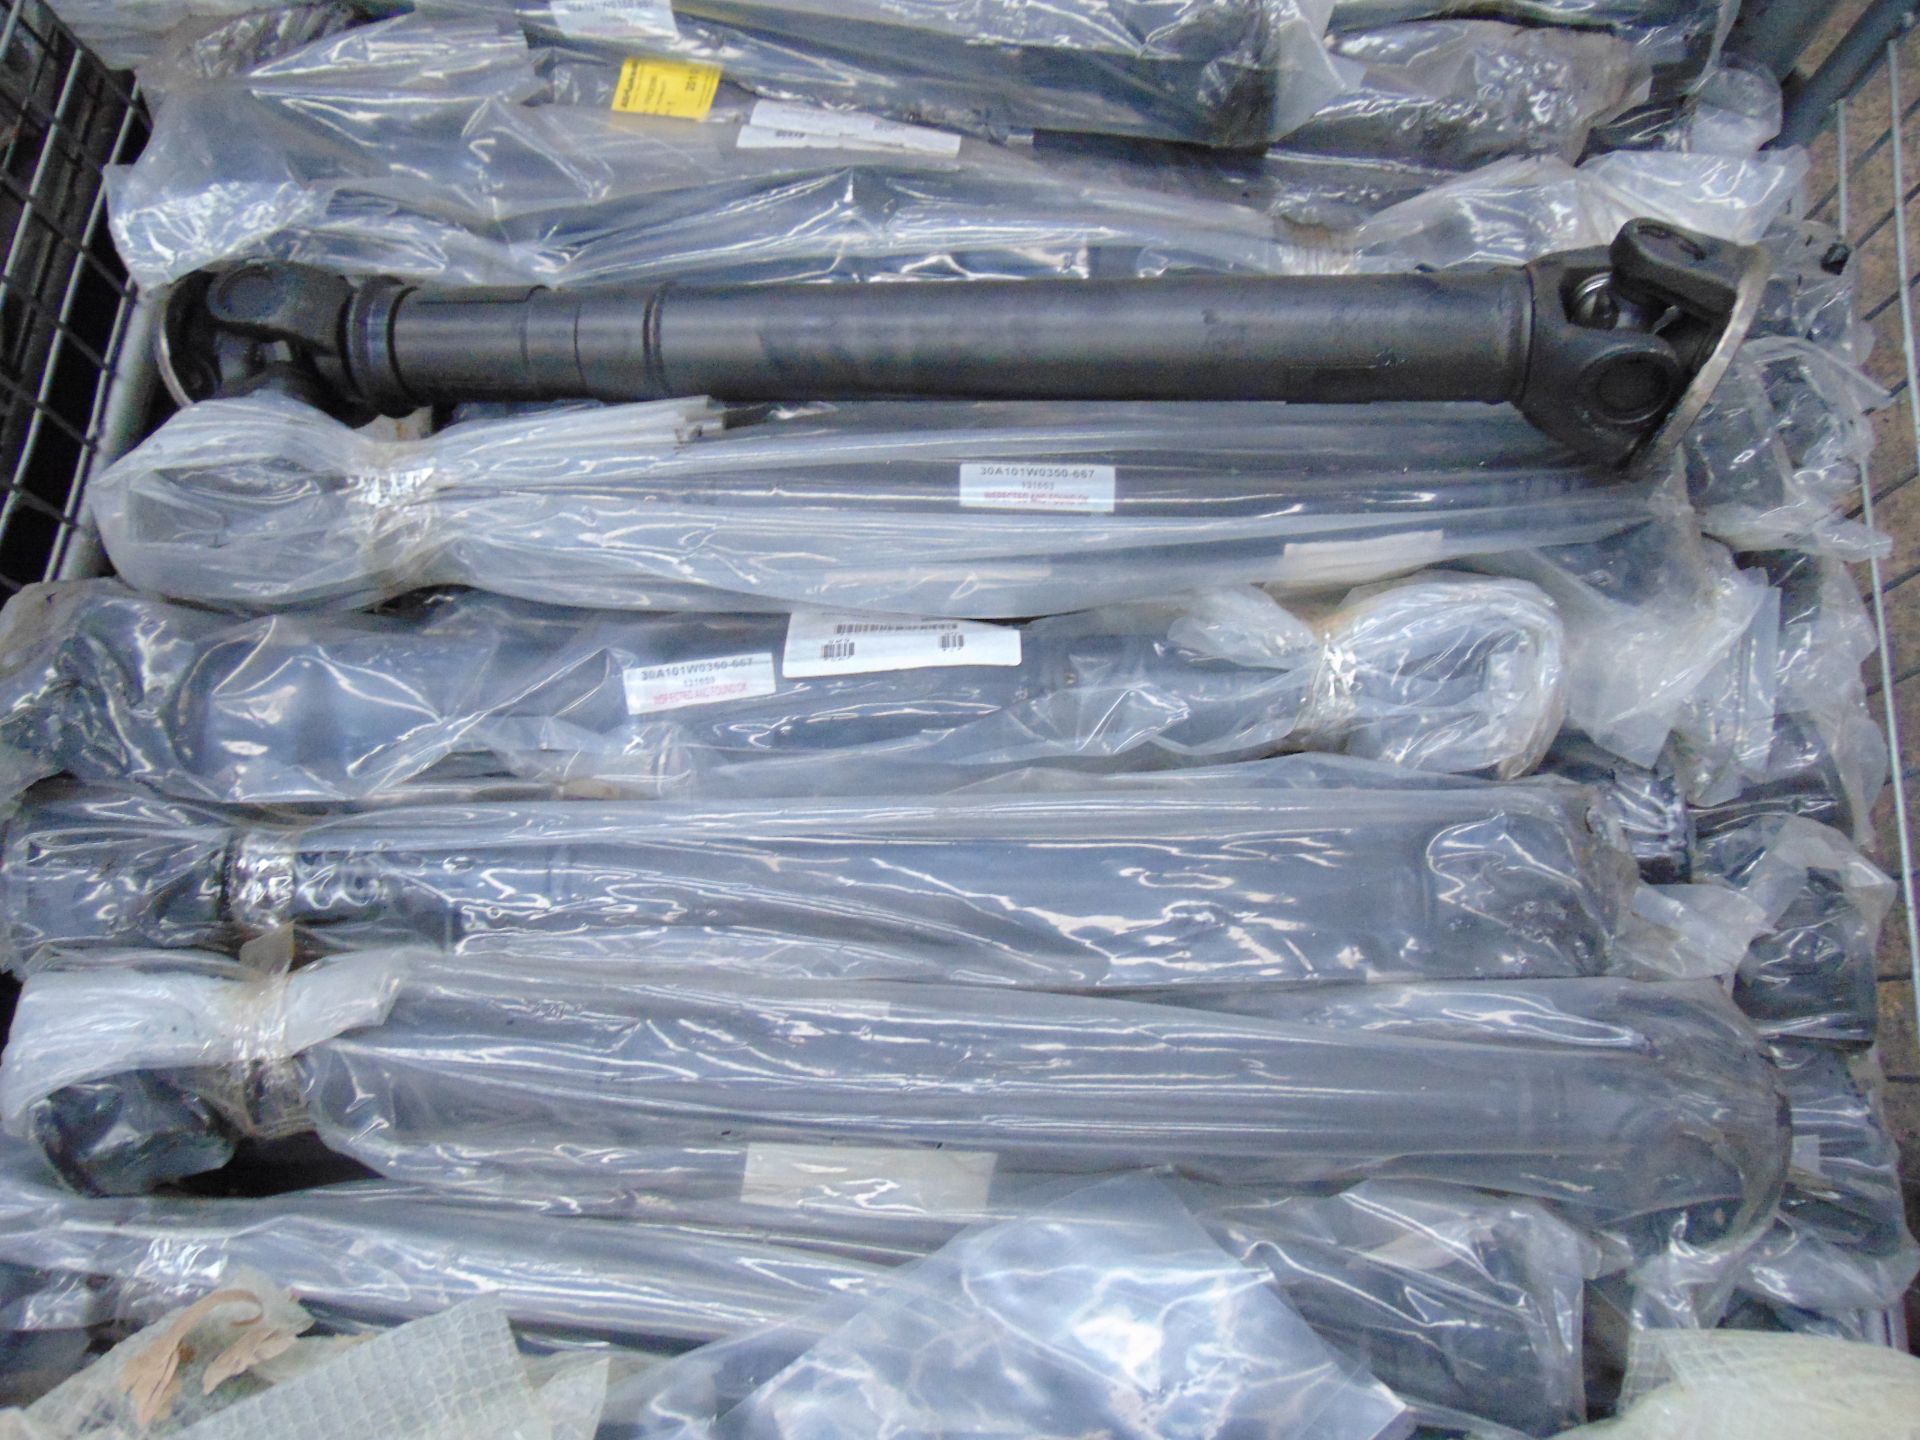 Approximately 50 x Land Rover Defender Prop Shafts P/No FRC8390 - Image 2 of 4